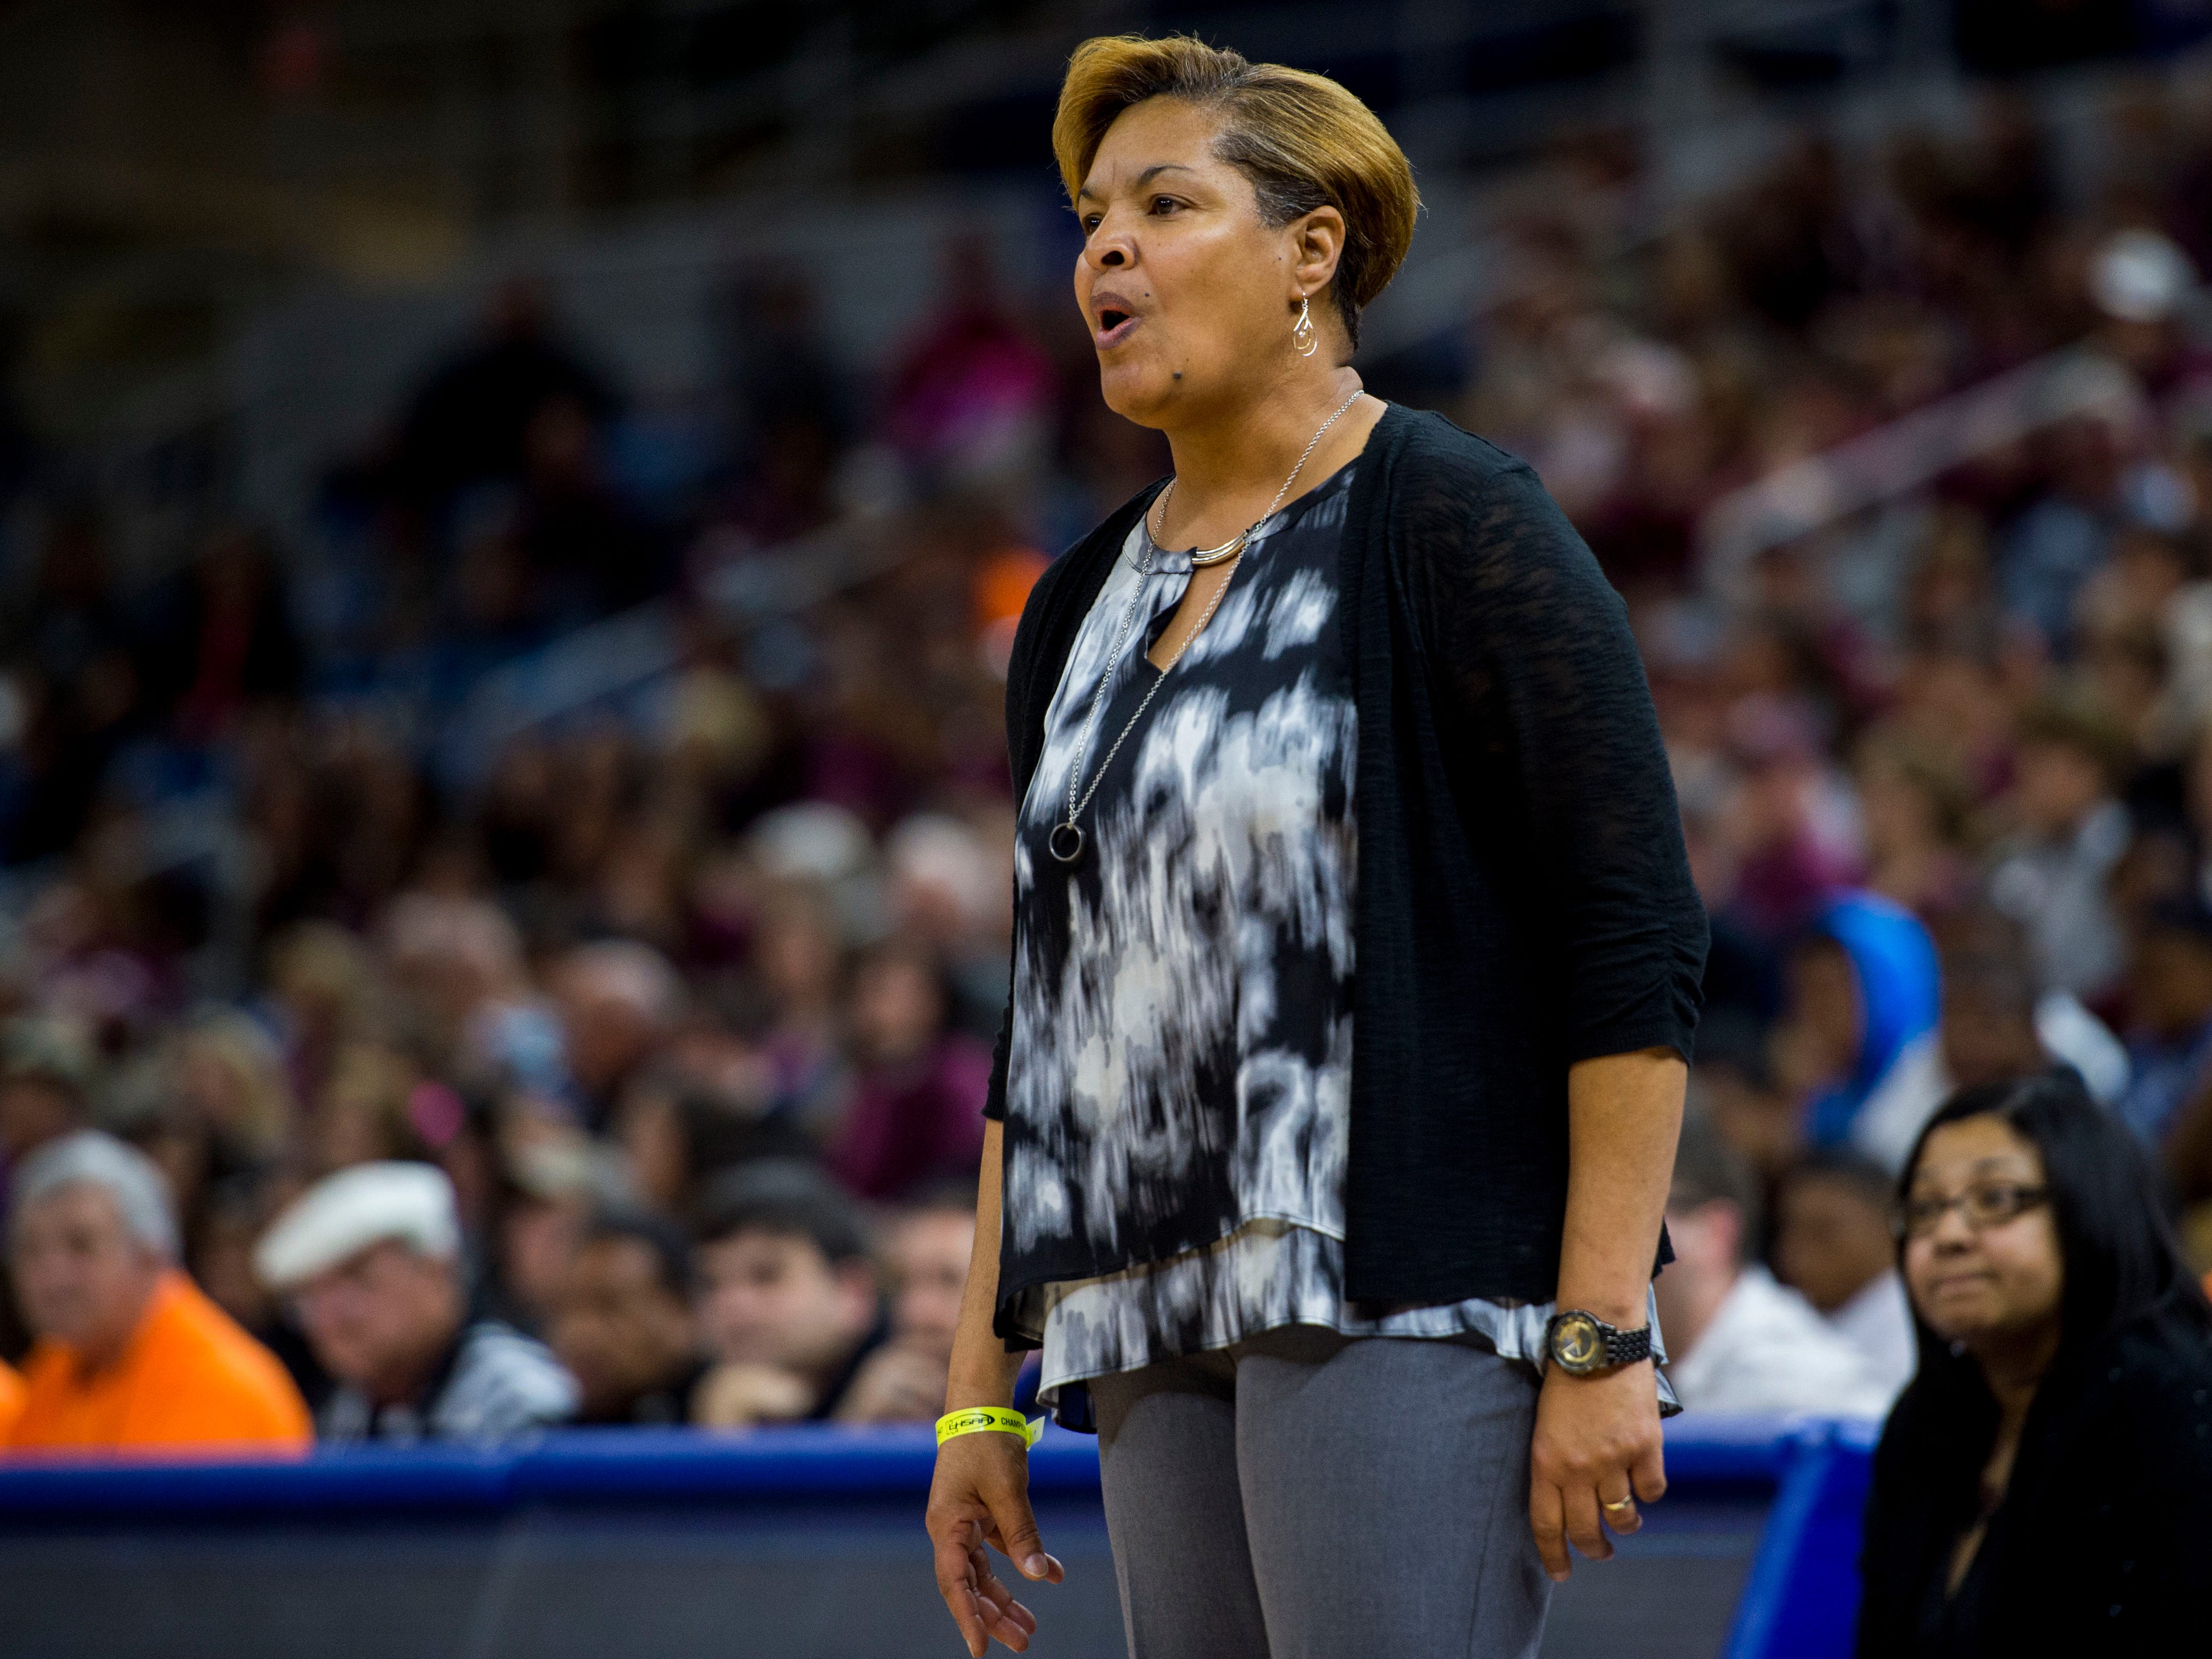 North Central head coach Vanessa Taylor calls a play adjustment during the first half of the LHSAA Class 1A Girls' Basketball State Championship game against Vermilion Catholic at Burton Coliseum in Lake Charles, La., Saturday, Sept. 7, 2015. (AP Photo/The Daily Advertiser, Paul Kieu)